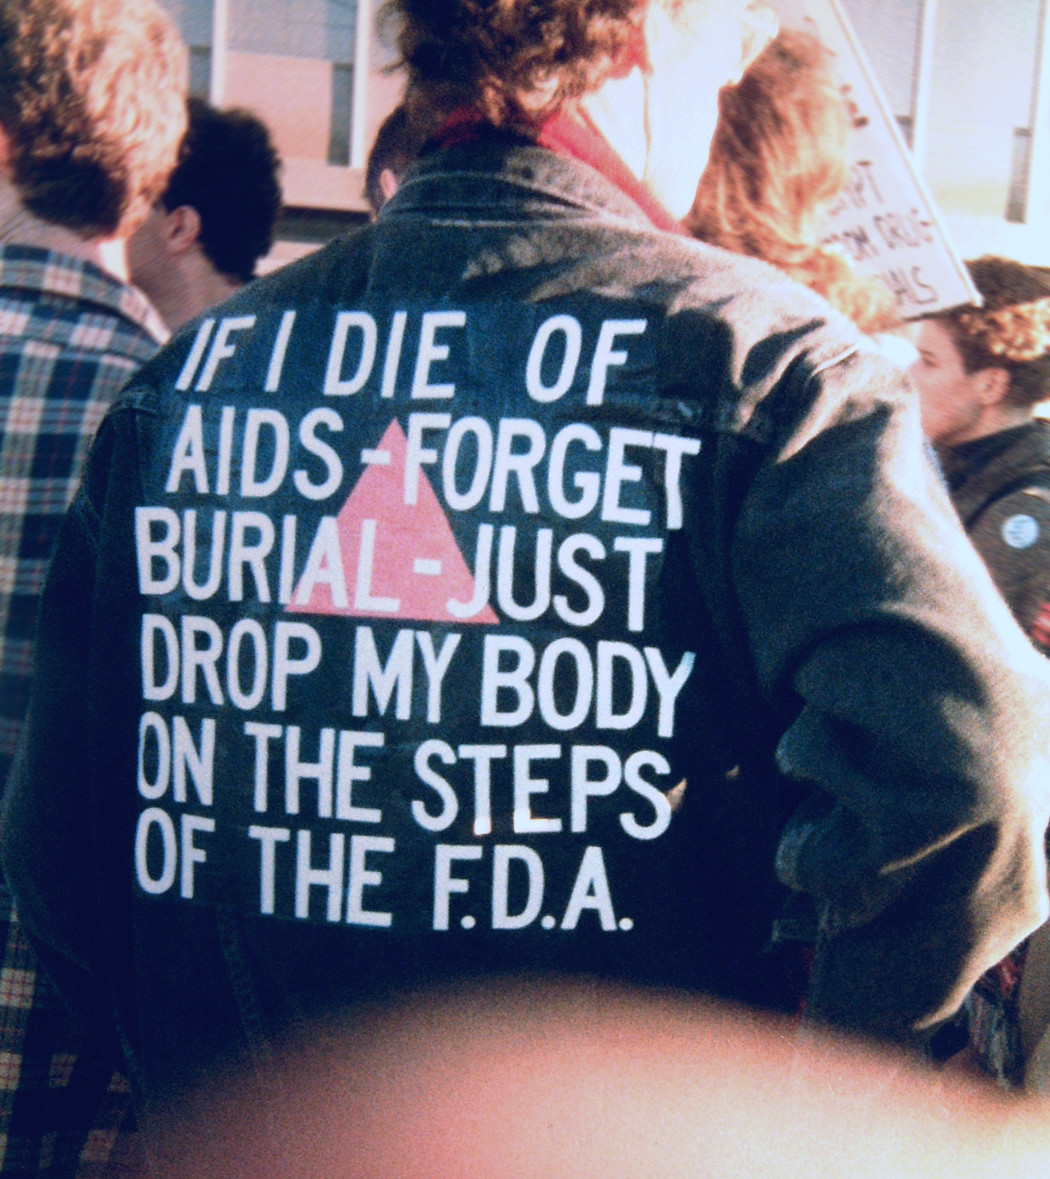 AIDS activist at ACT UP's FDA protest, October 11, 1988.